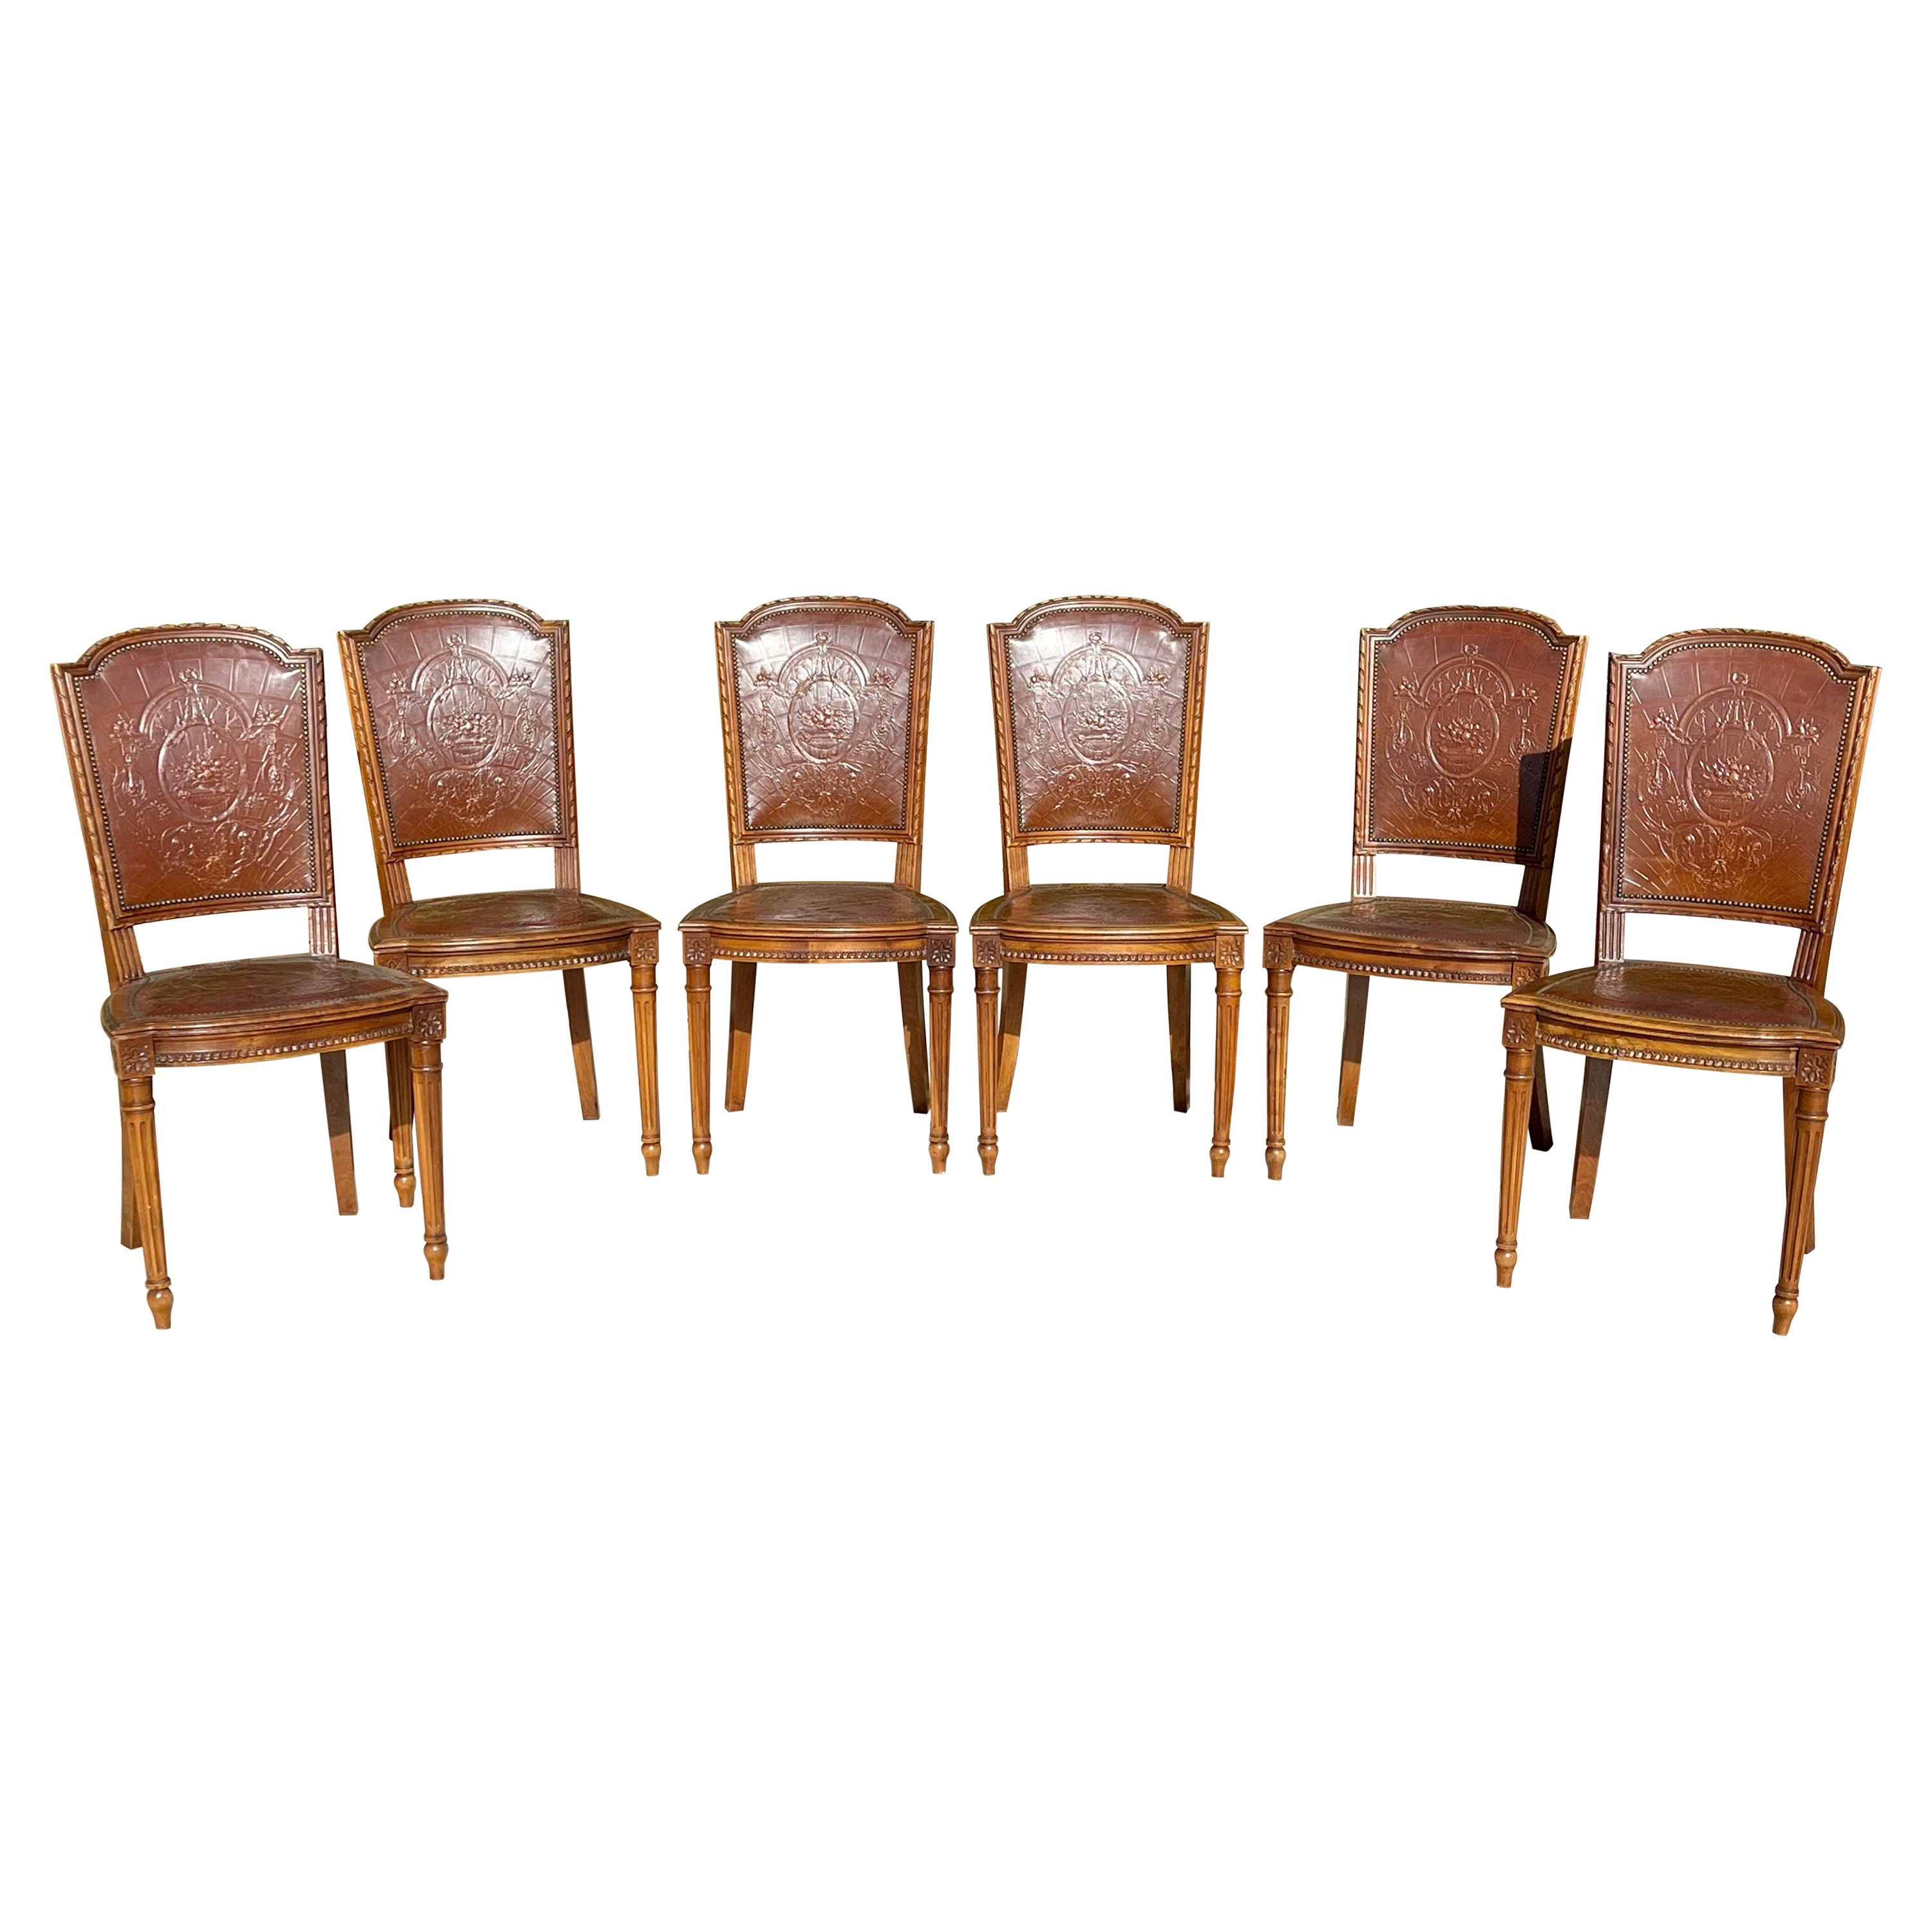 Suite of 6 Louis XVI Style Walnut and Cordoba Leather Chairs For Sale